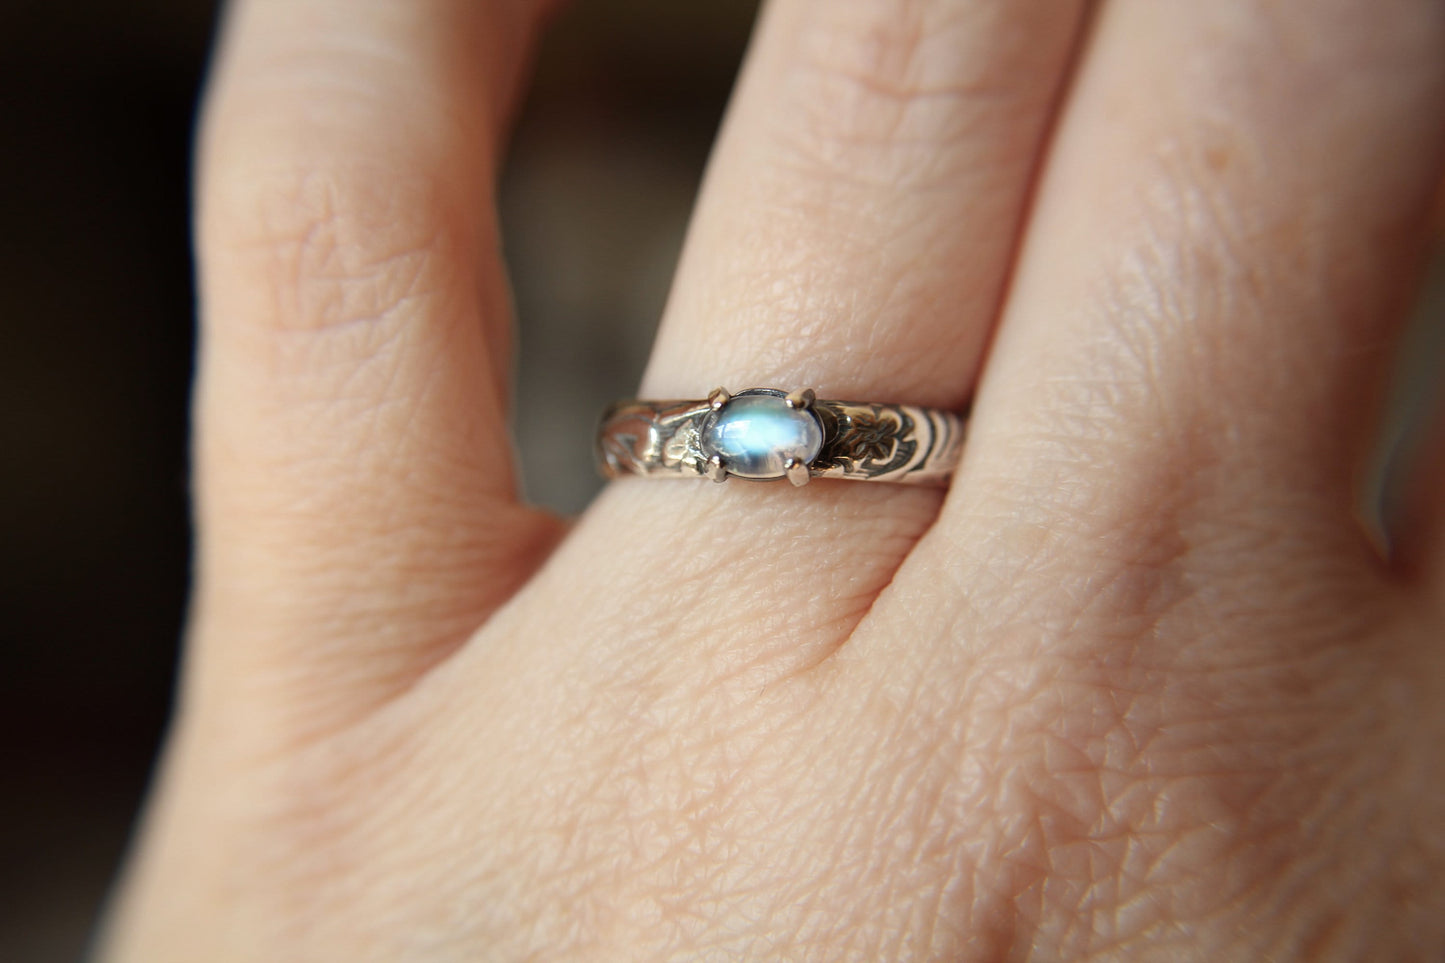 Rainbow Moonstone Ring, Floral Ring, Unique Design, Boho Ring, Oval Moonstone Ring, Moonstone Stacking Ring, Wide Band Ring, FMJ